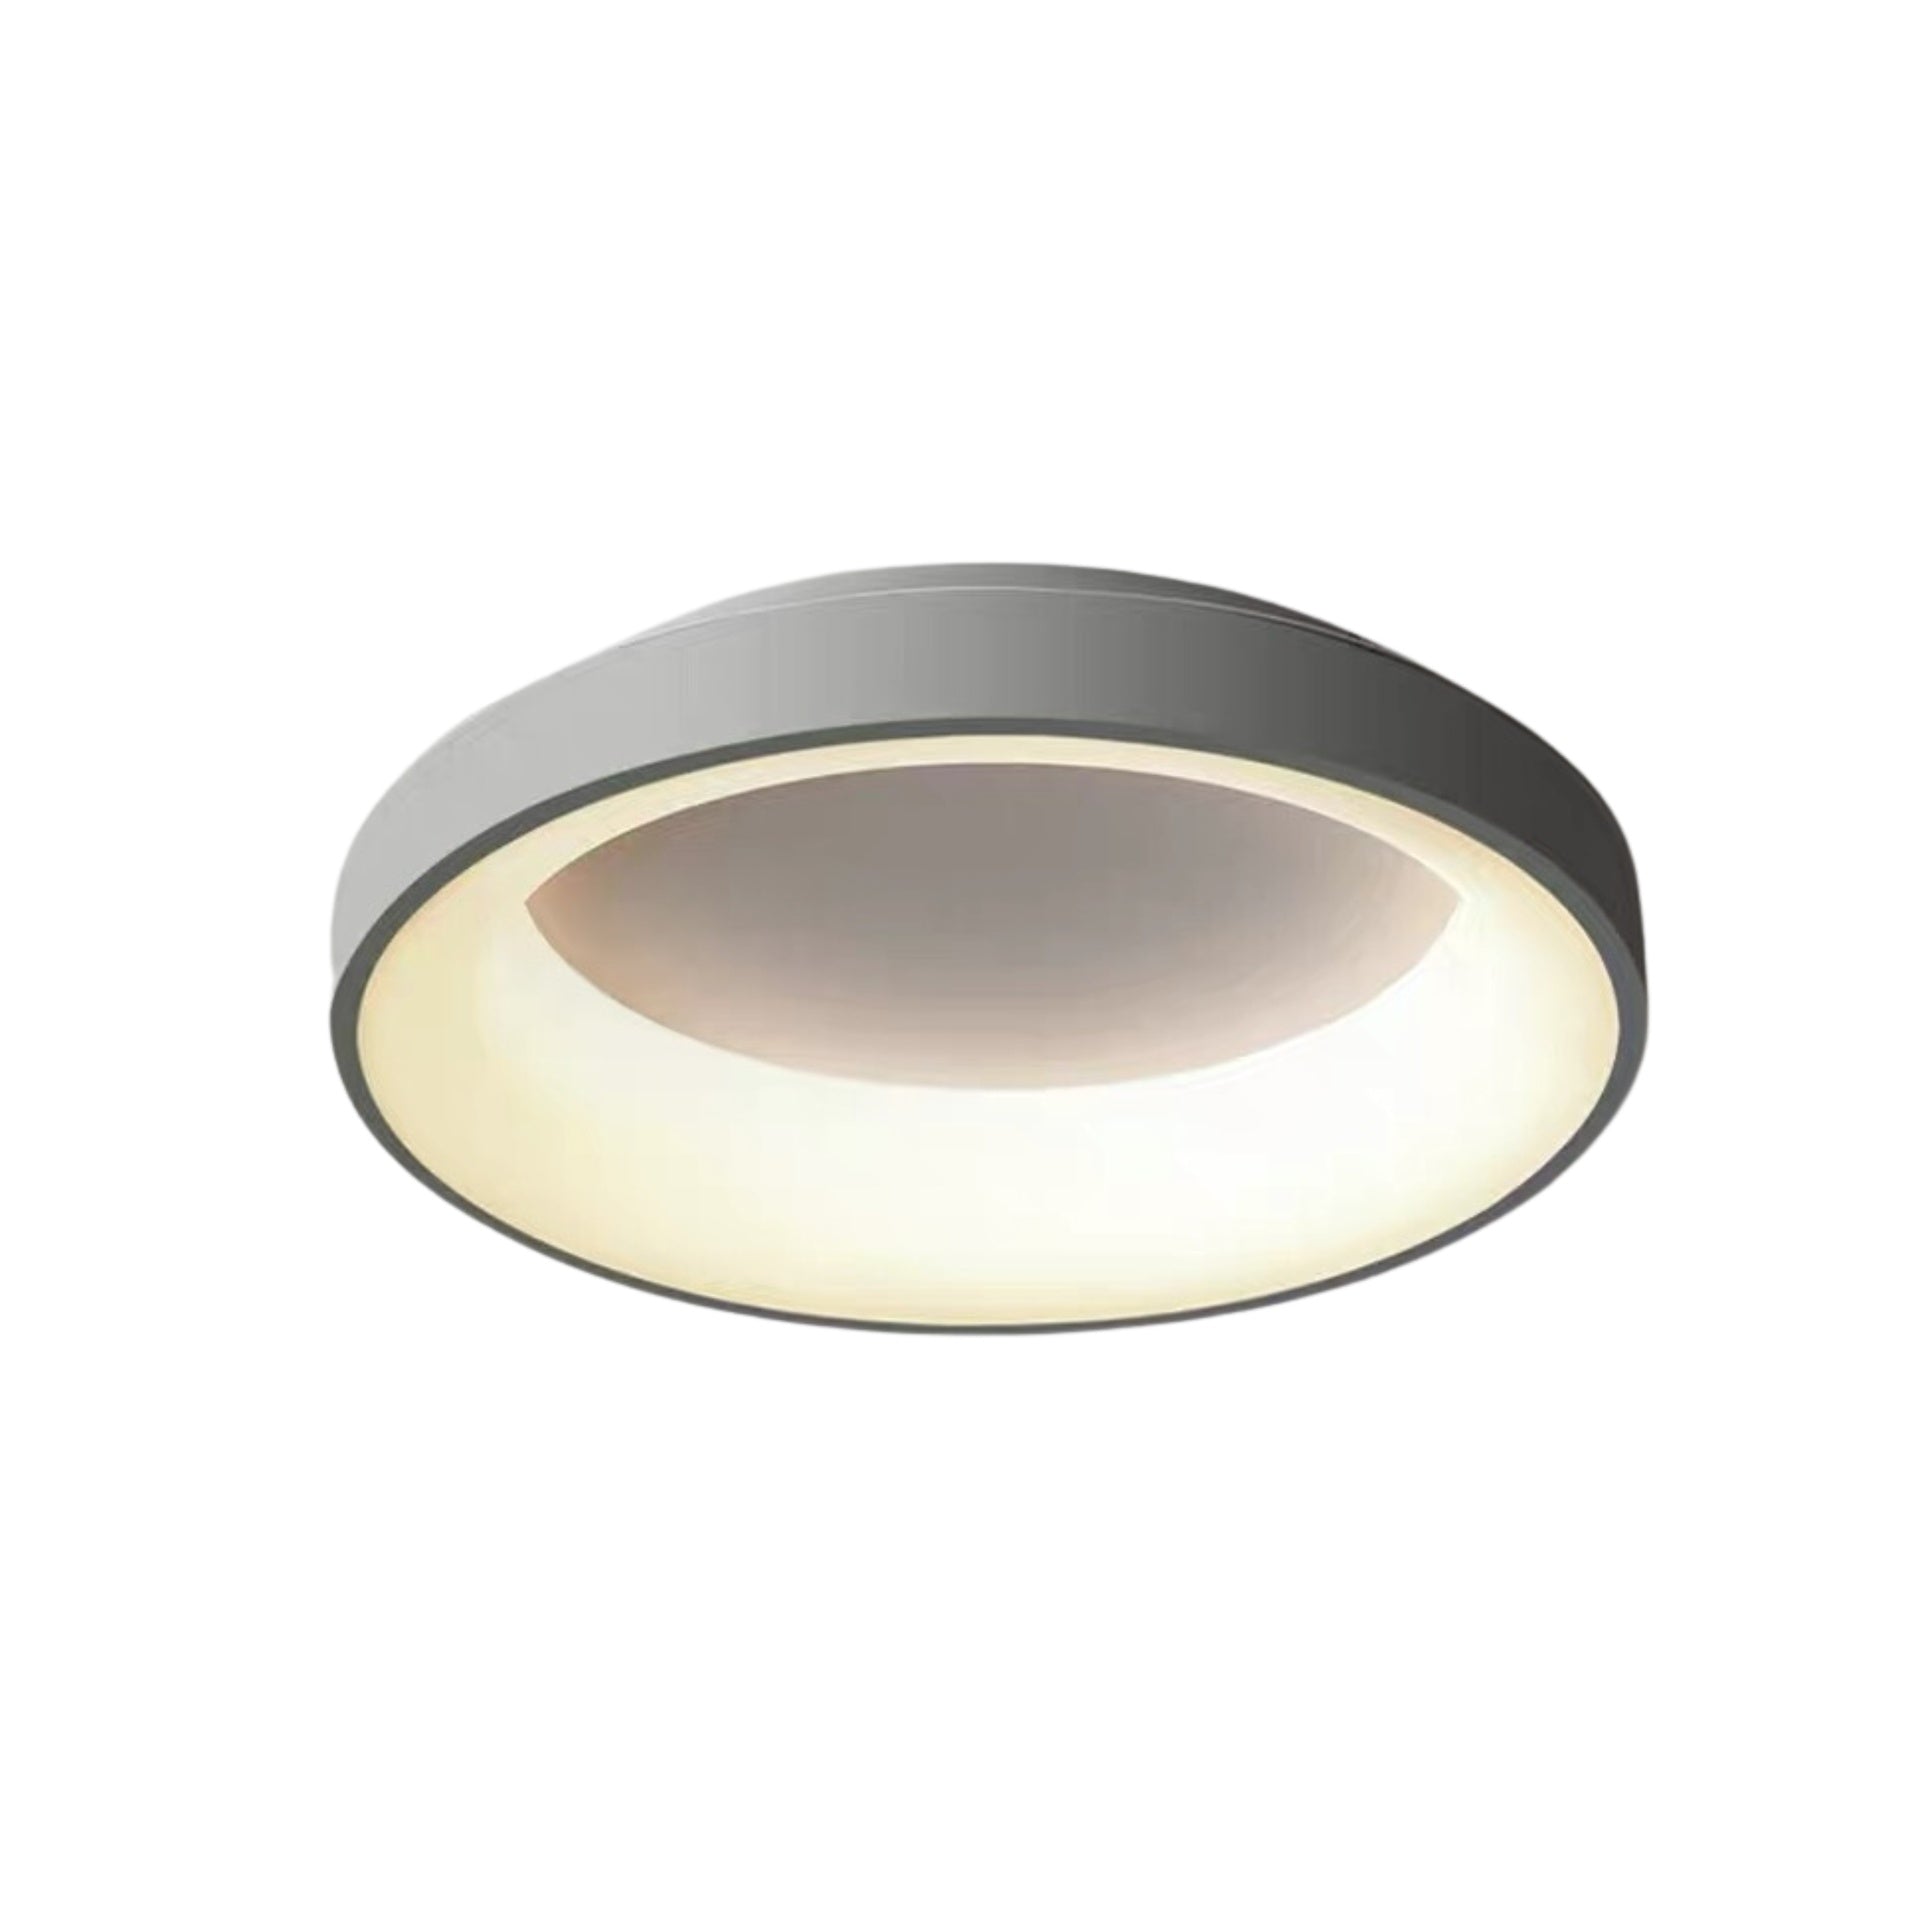 Brushed Silver Ceiling Light D18.9" H2.36" 38W Triac Dimmable 3000K 120v/60Hz